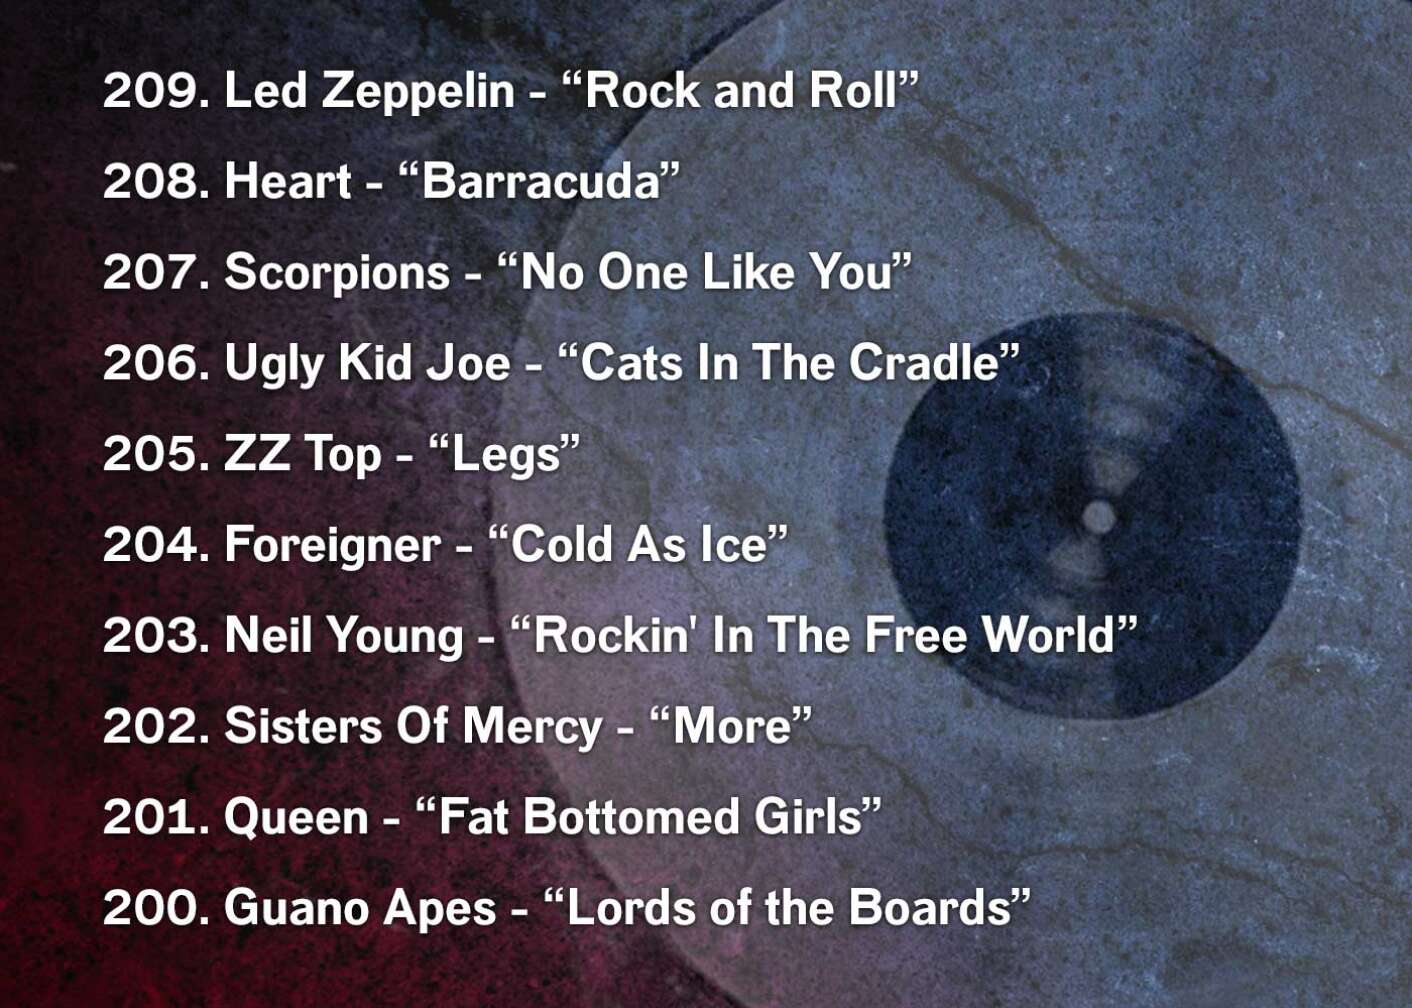 209. Led Zeppelin - “Rock and Roll” 208. Heart - “Barracuda” 207. Scorpions - “No One Like You” 206. Ugly Kid Joe - “Cats In The Cradle” 205. ZZ Top - “Legs” 204. Foreigner - “Cold As Ice” 203. Neil Young - “Rockin' In The Free World” 202. Sisters Of Mercy - “More” 201. Queen - “Fat Bottomed Girls” 200. Guano Apes - “Lords of the Boards”